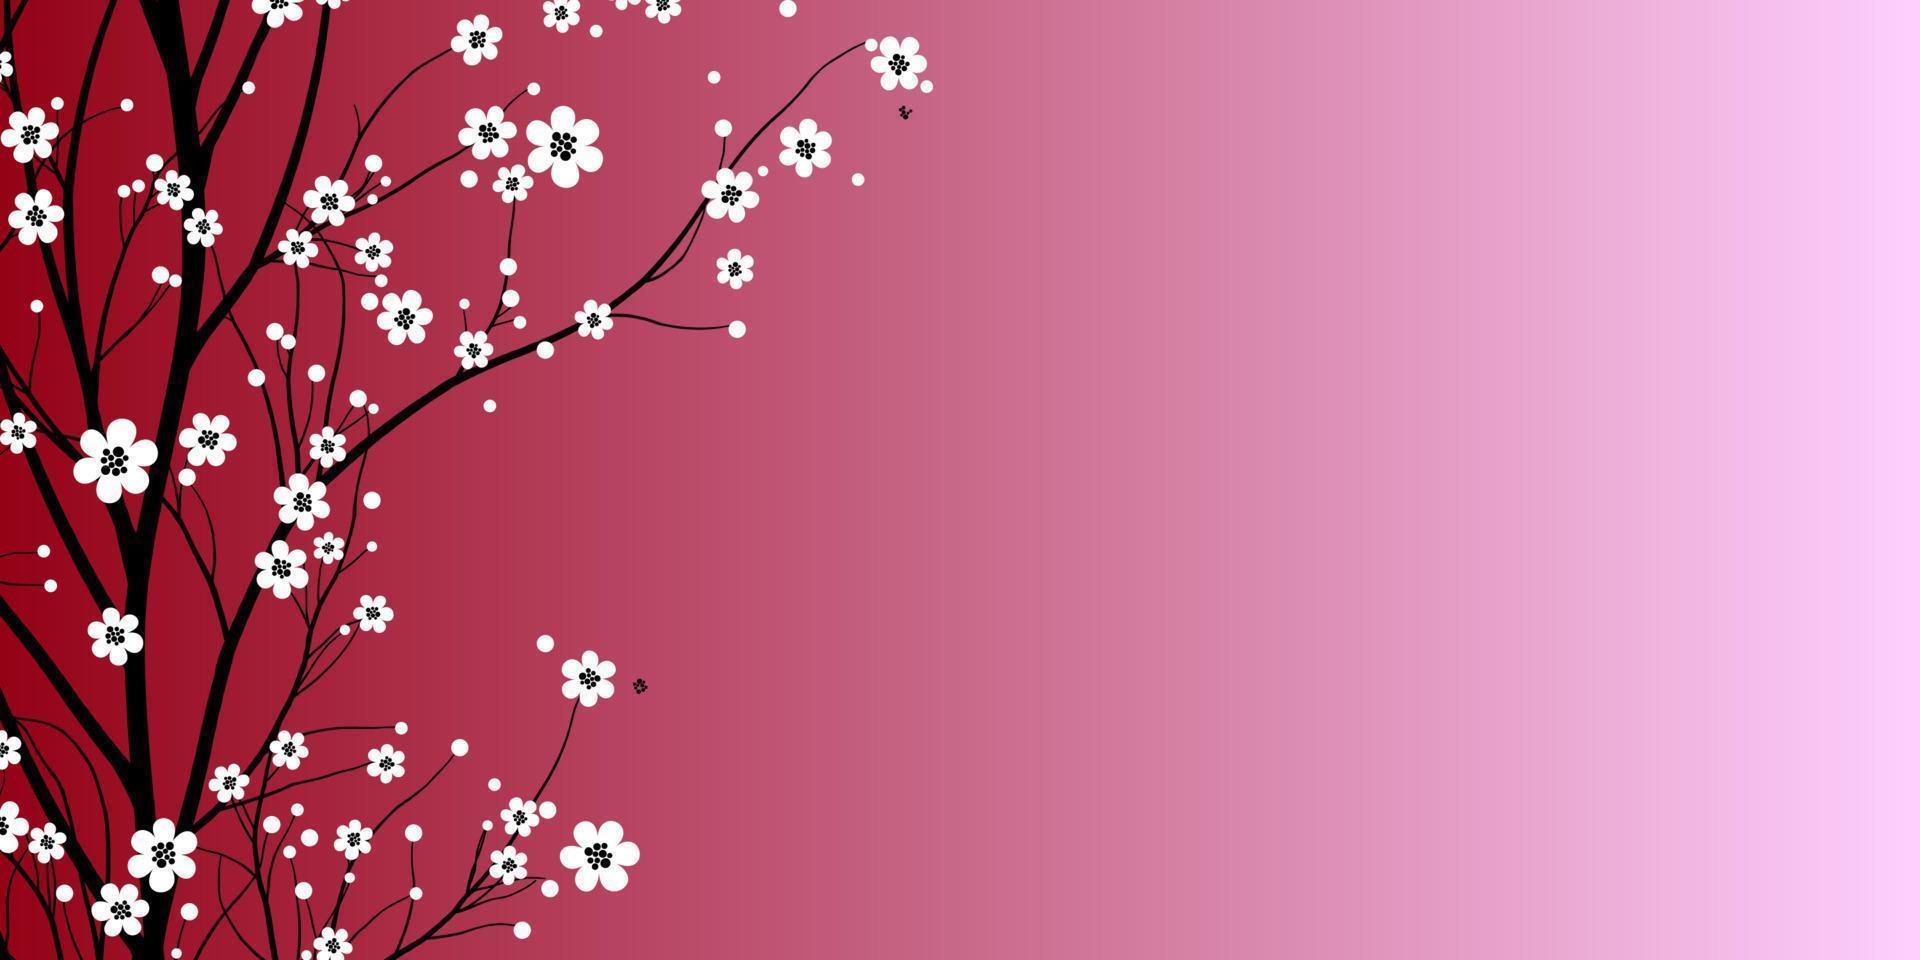 Plum blossom in spring with free copy space for text. the branches of plum blossom tree with hills background. vector